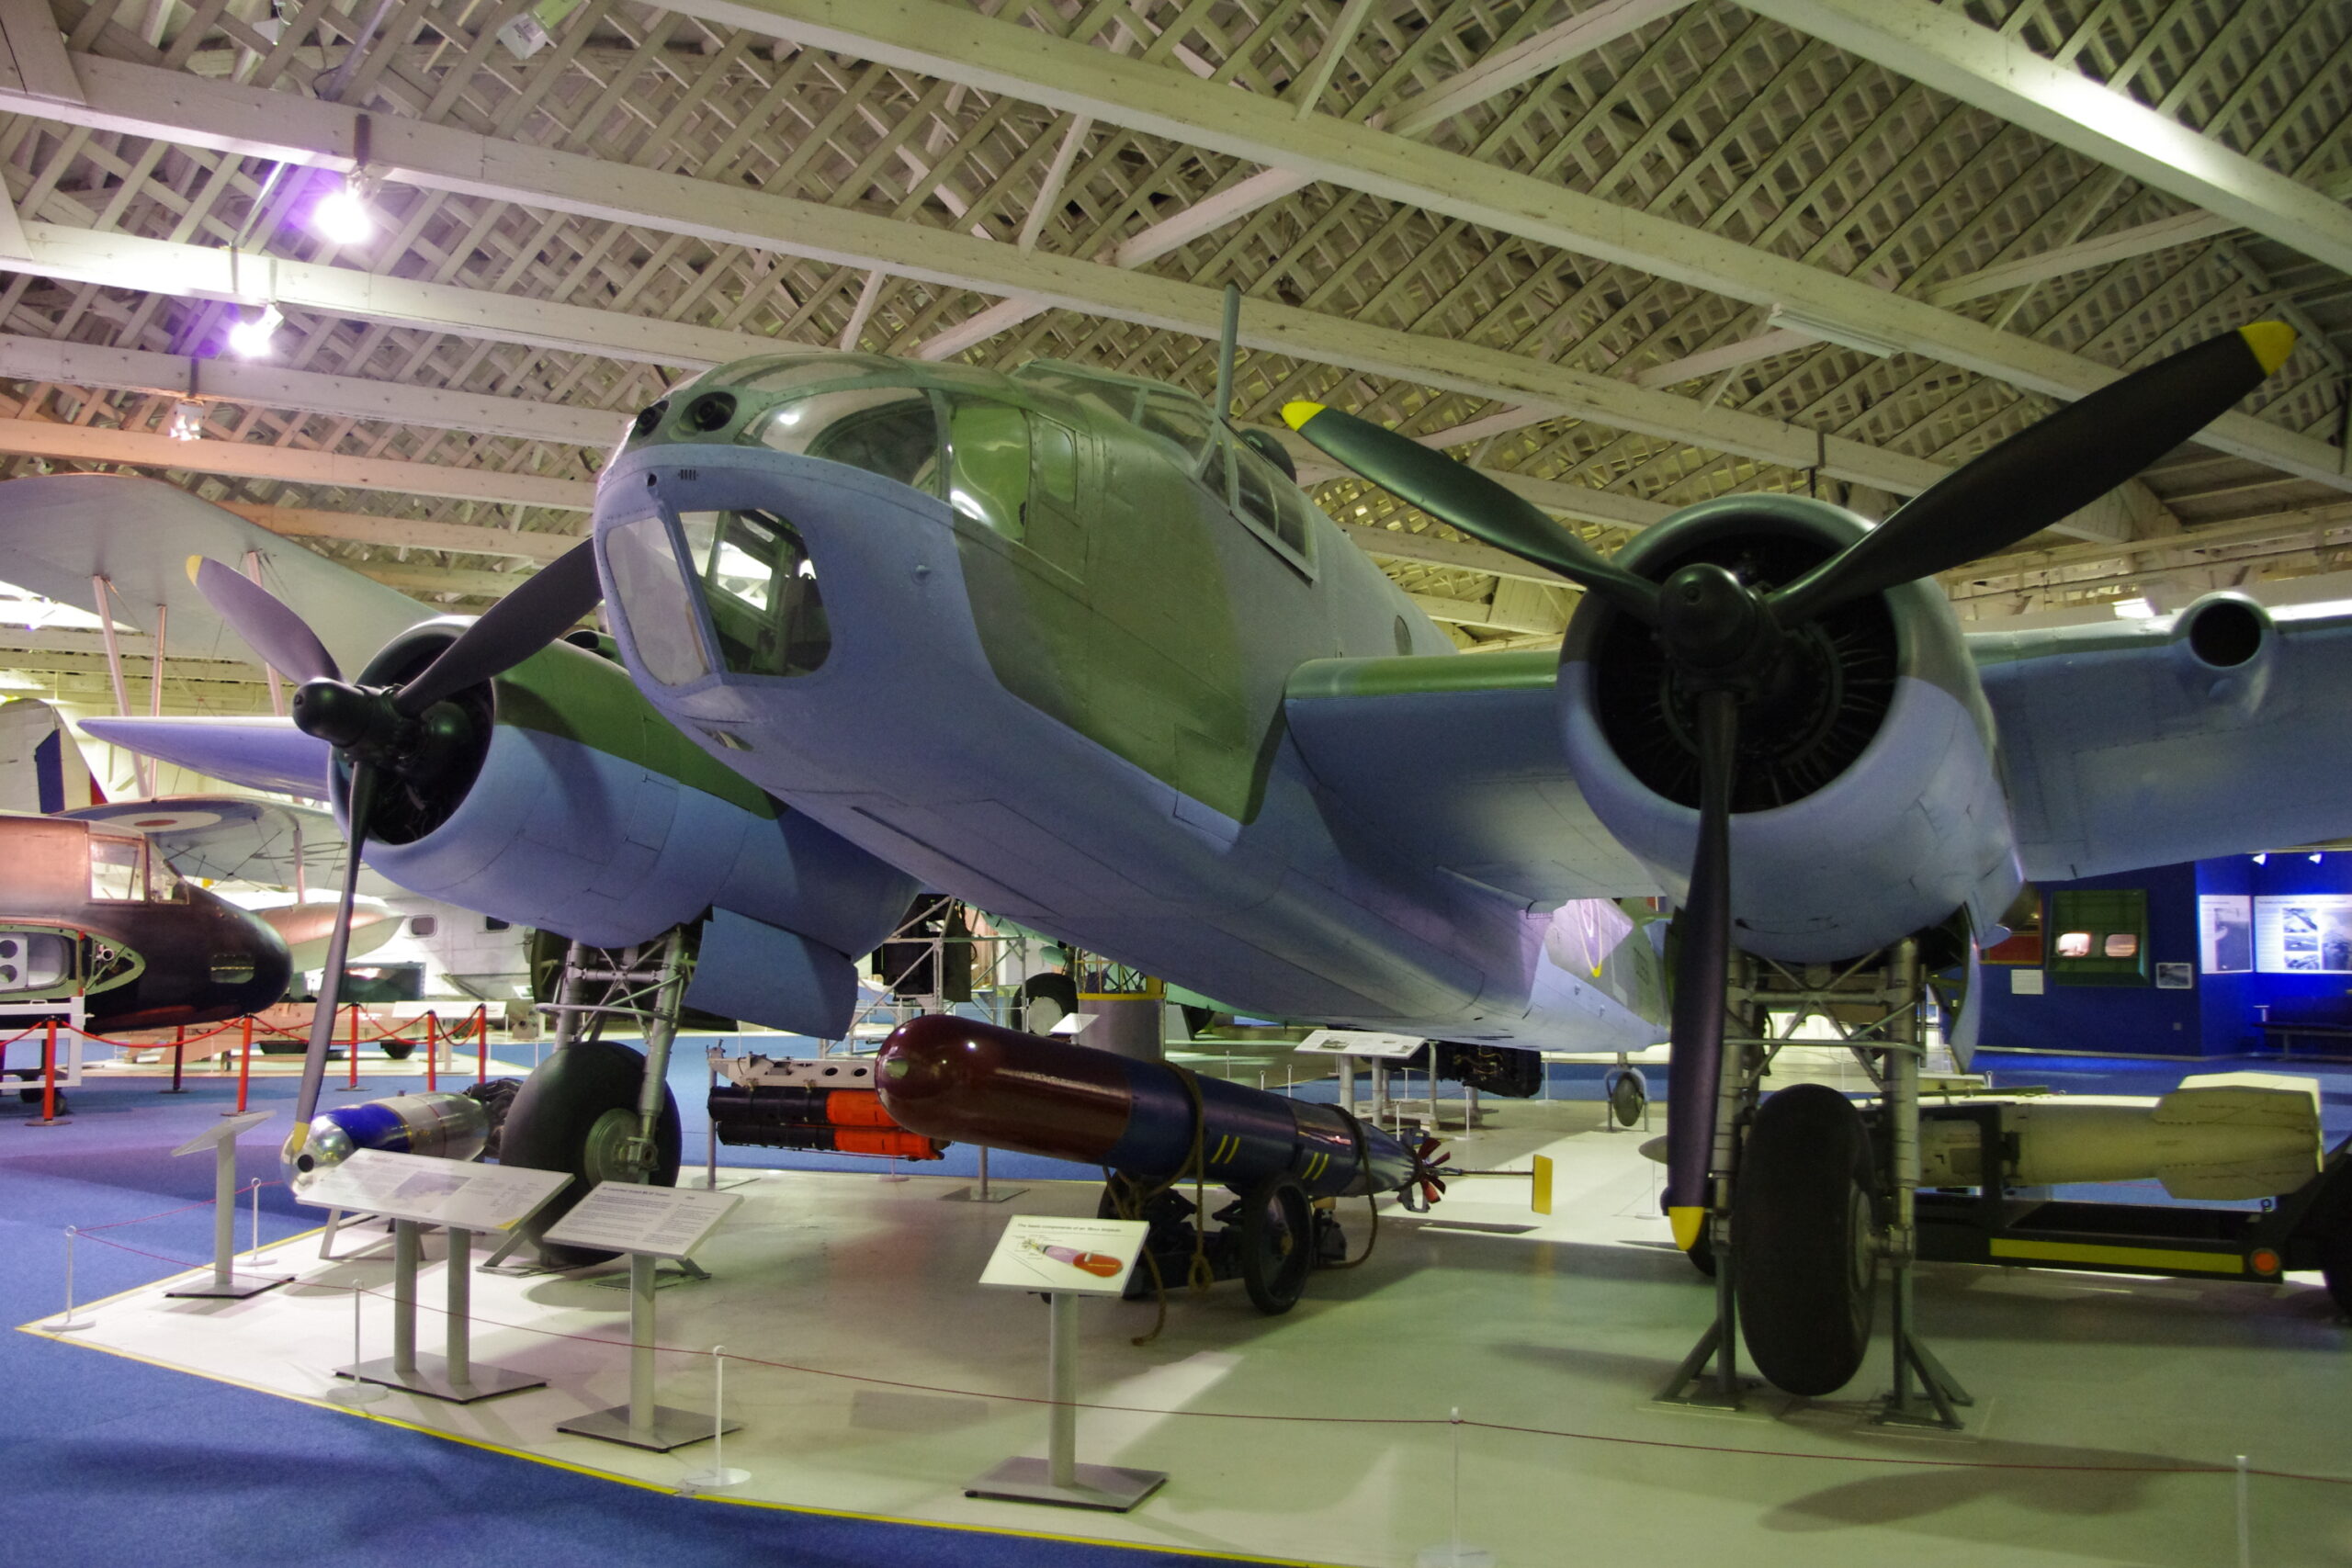 Restored Beaufort "DD931" at the RAF Museum, London